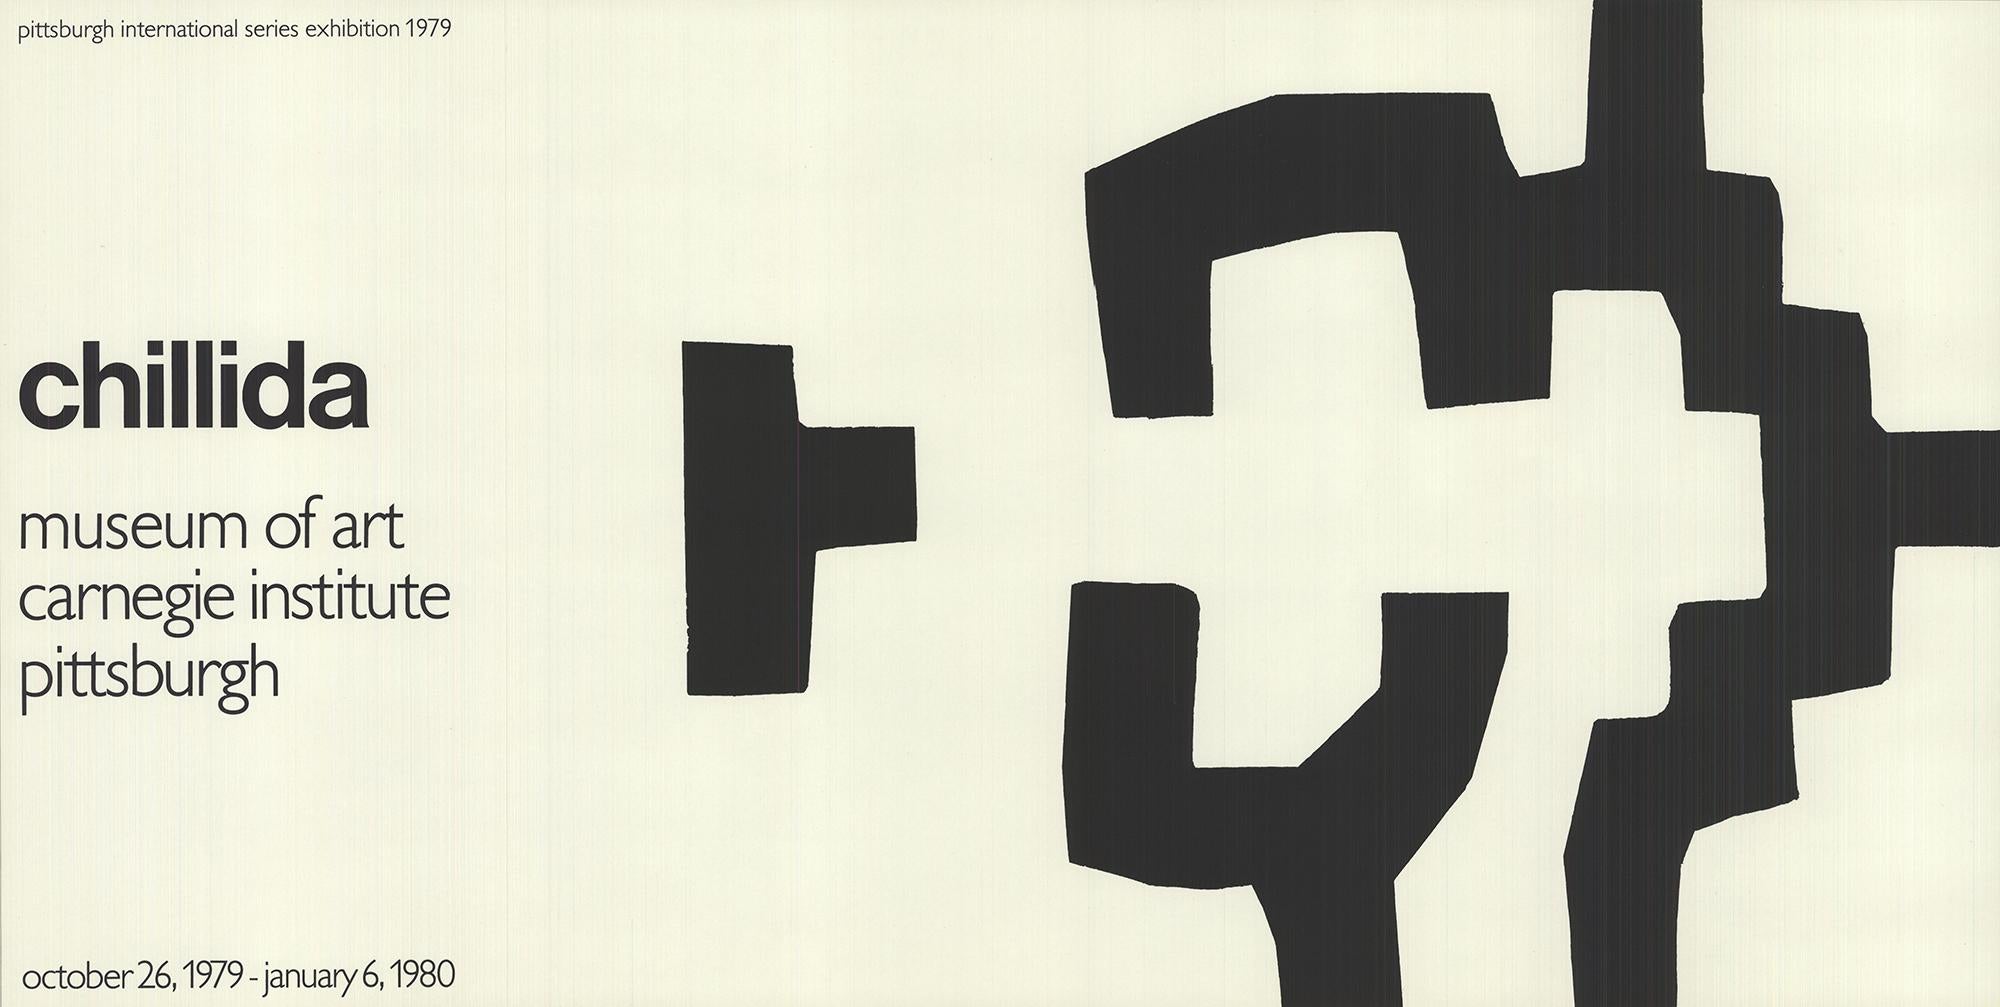 Poster for a Chillida exhibit at the Museum of Art Carnegie Institute in Pittsburgh, 1980.